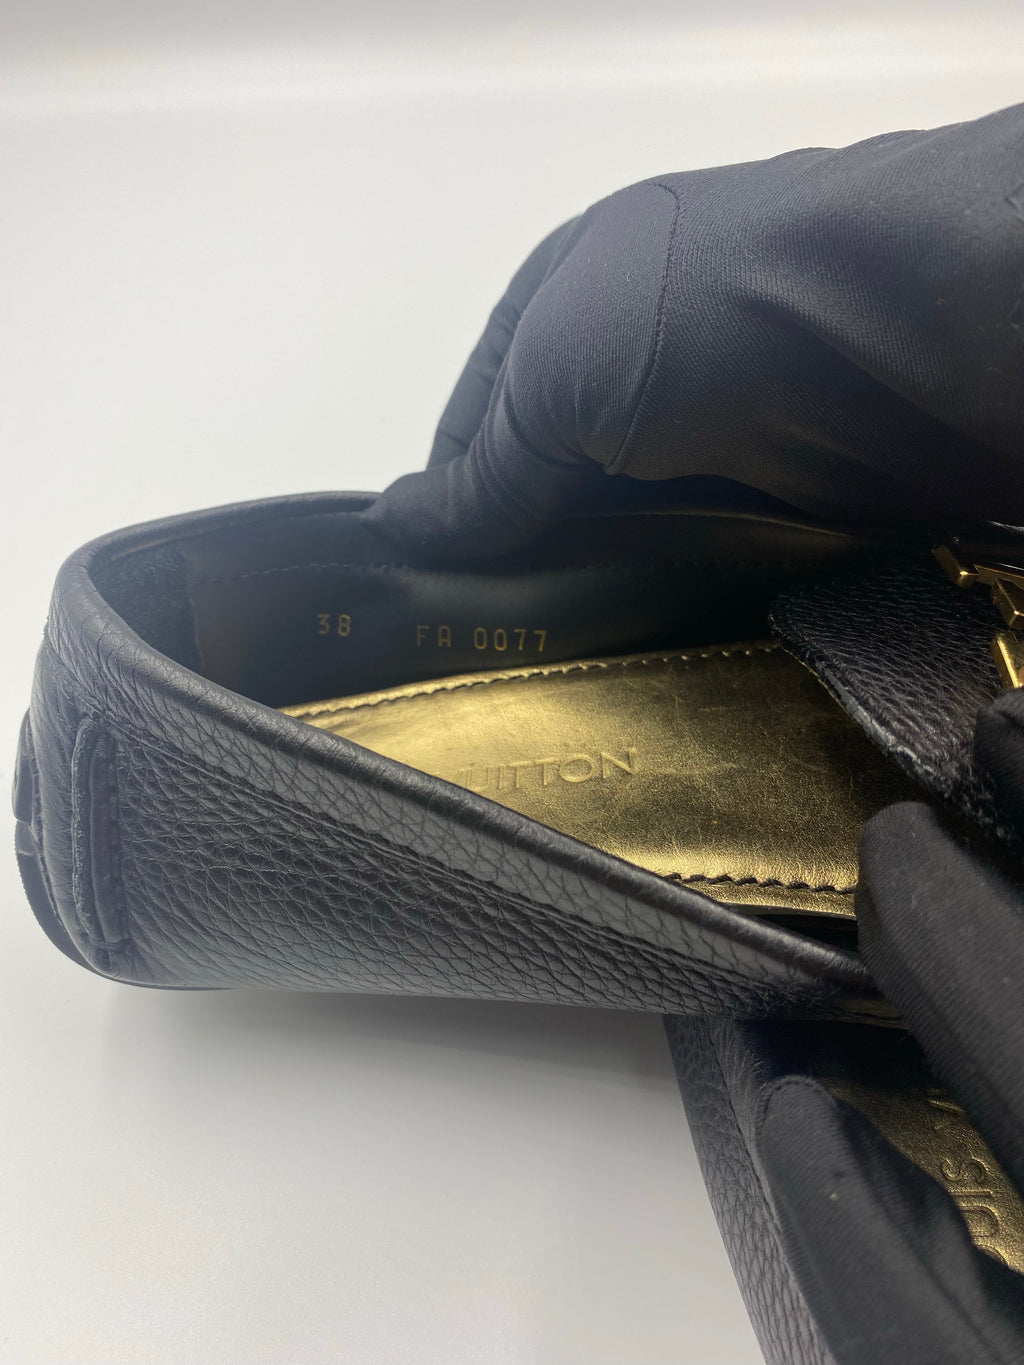 Unused/Restored Sole Louis Vuitton Loafers For Women